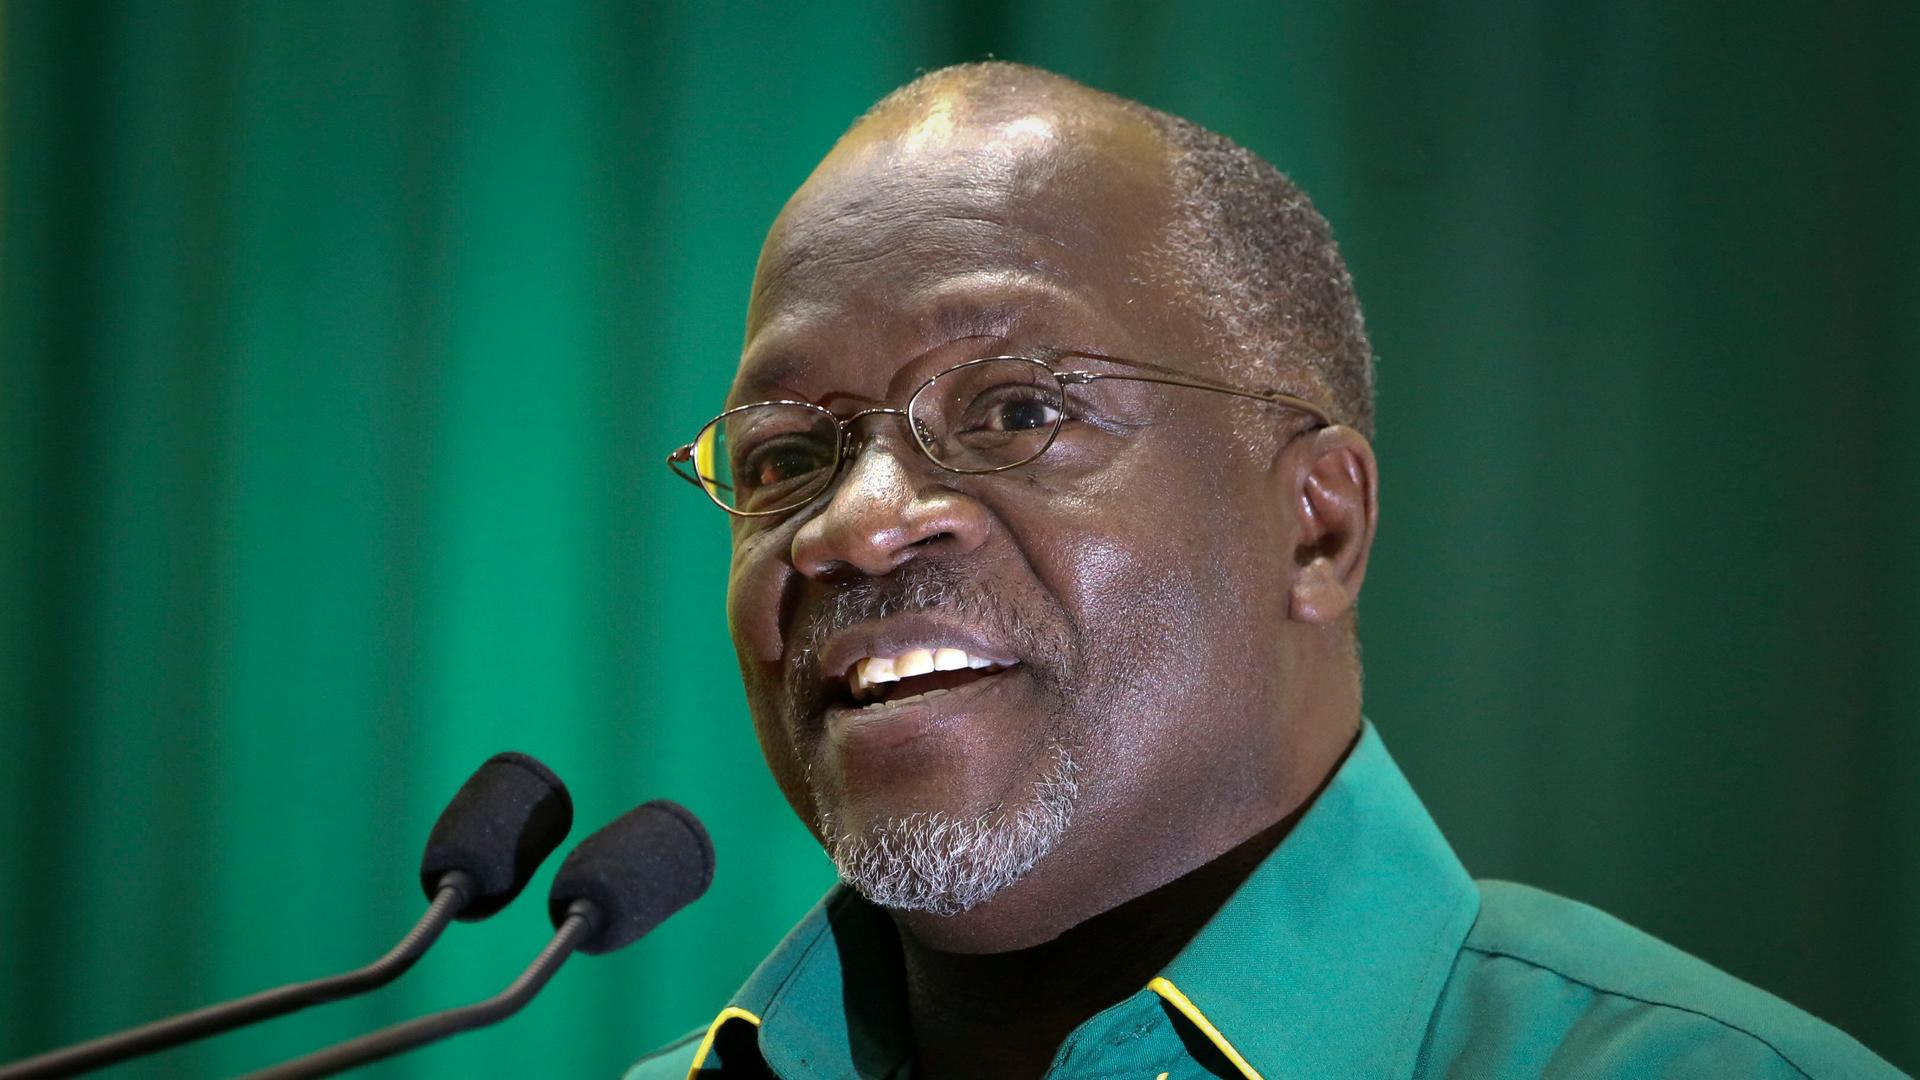 John Magufuli wears glasses a green shirt and speaks at a podium with a green background 